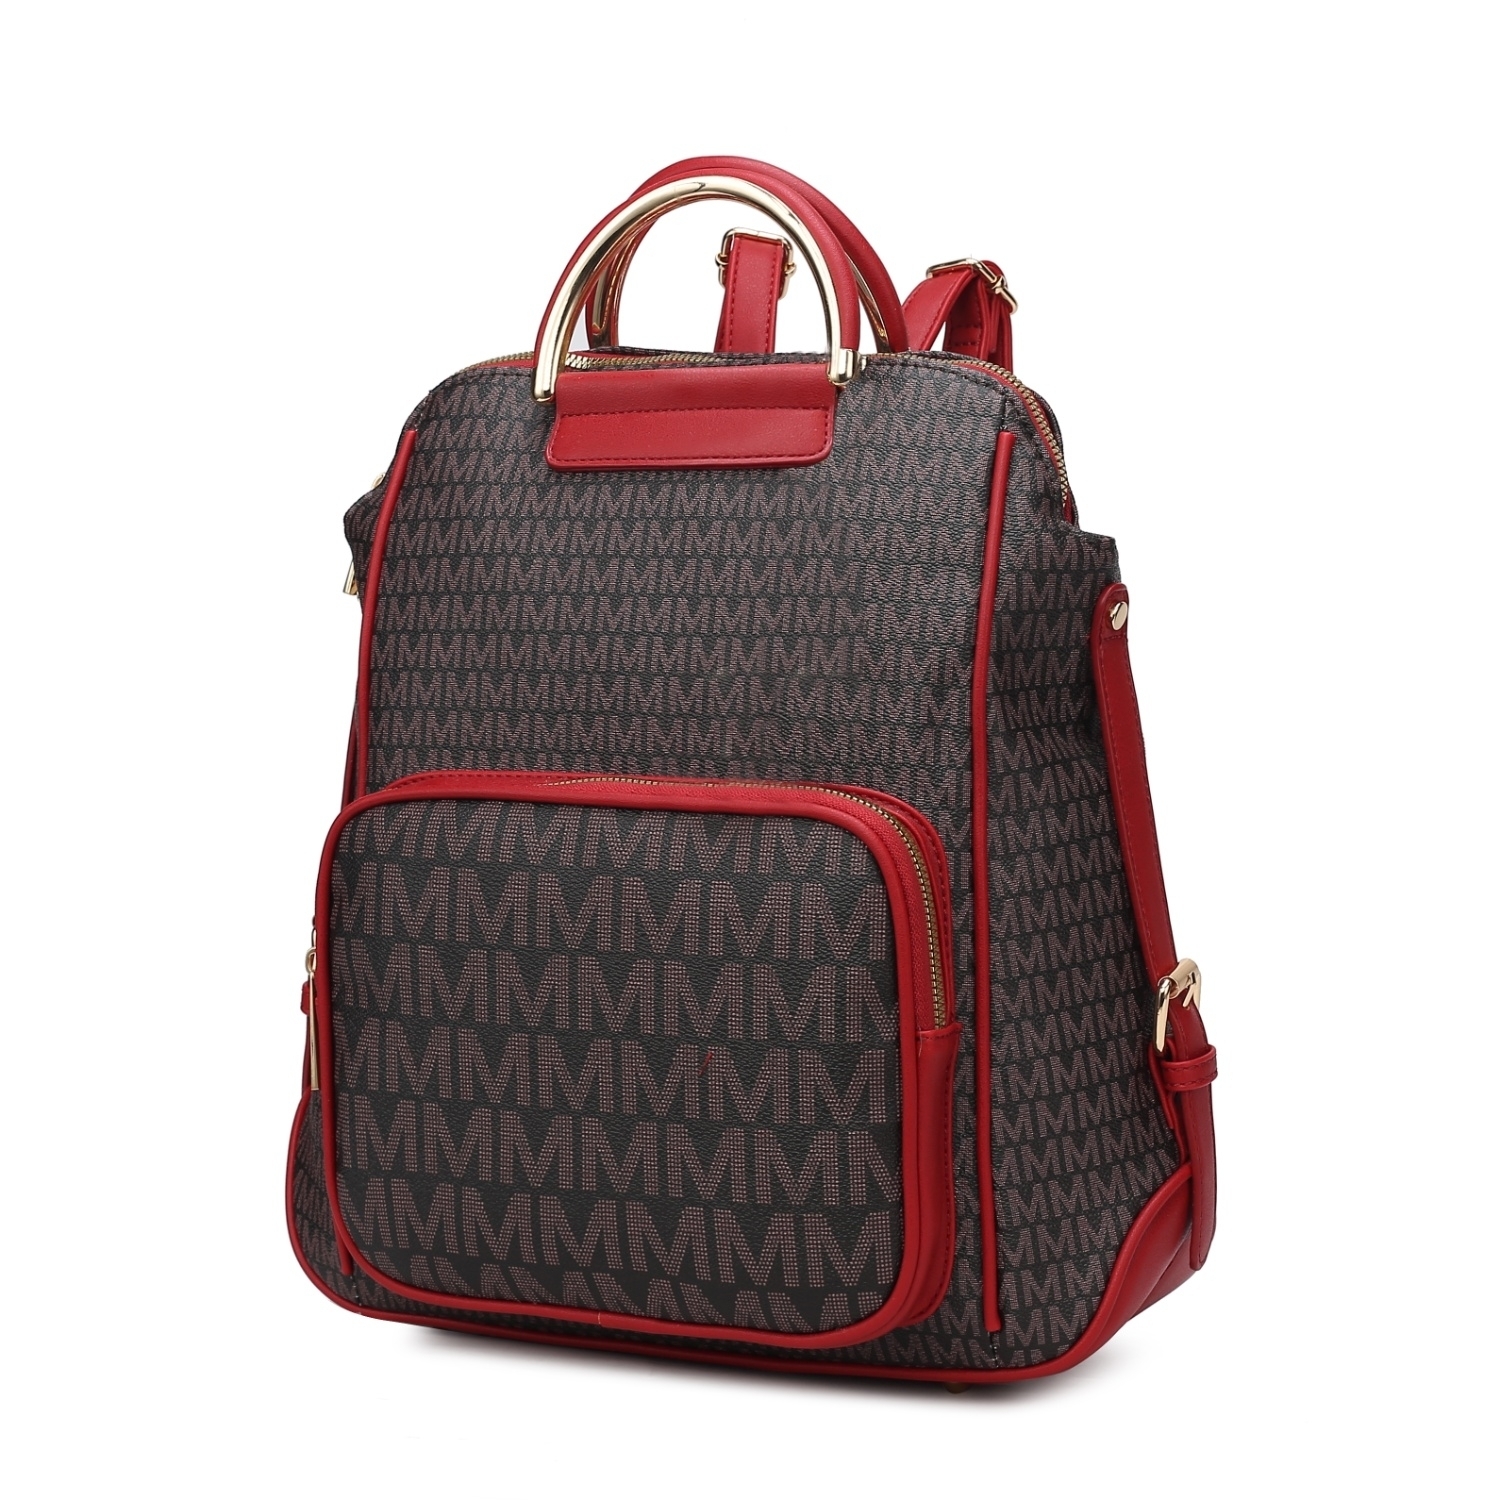 MKF Collection June M Logo Printed Vegan Leather Women's Backpack By Mia K - Red